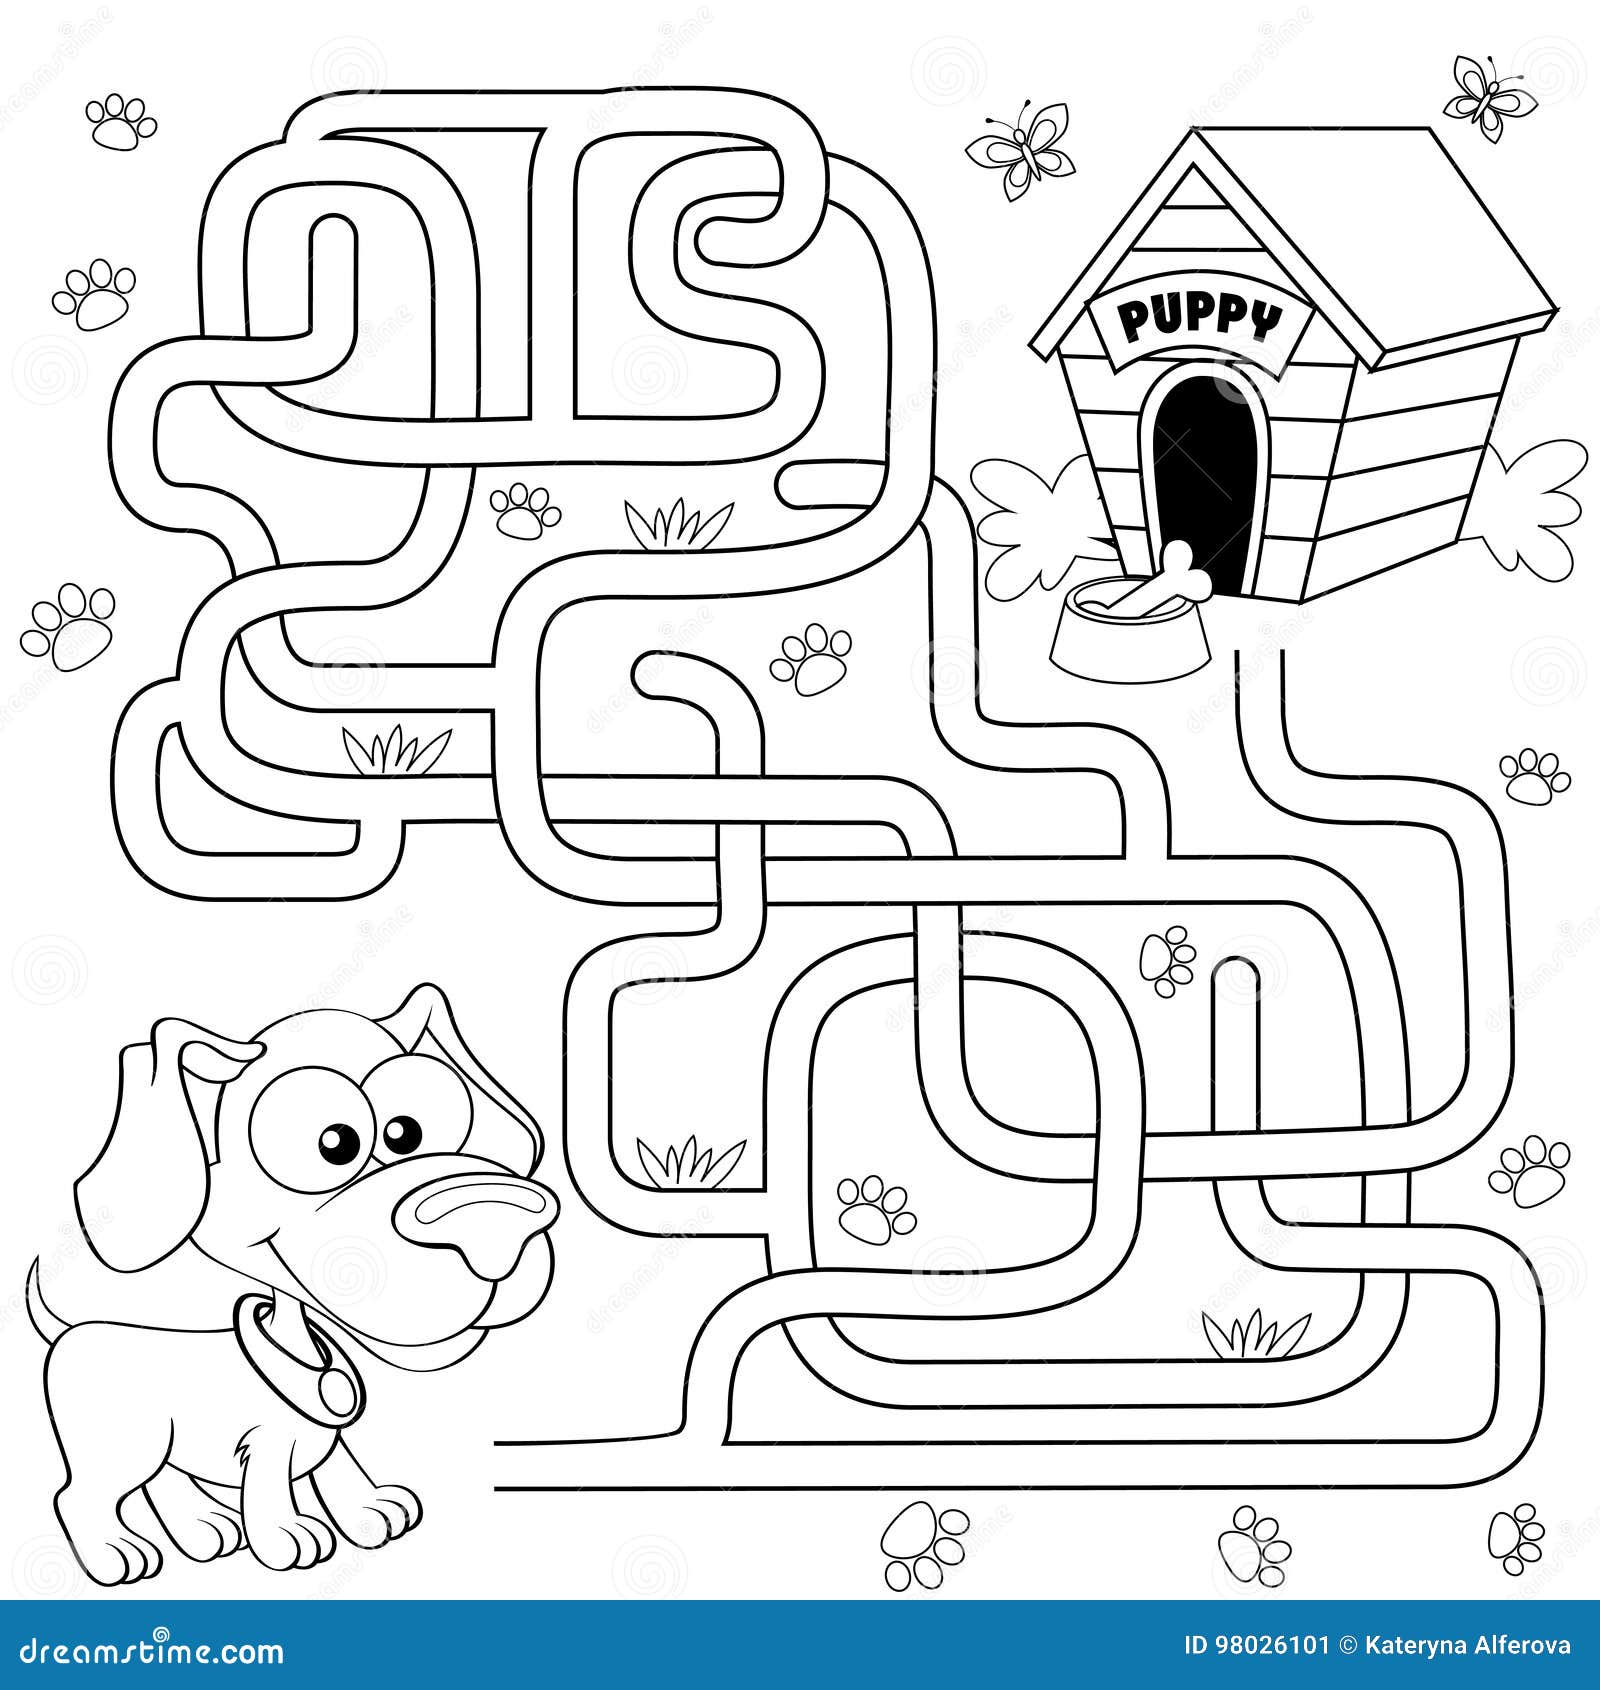 Help Puppy Find Path To His House Labyrinth Maze Game For Kids